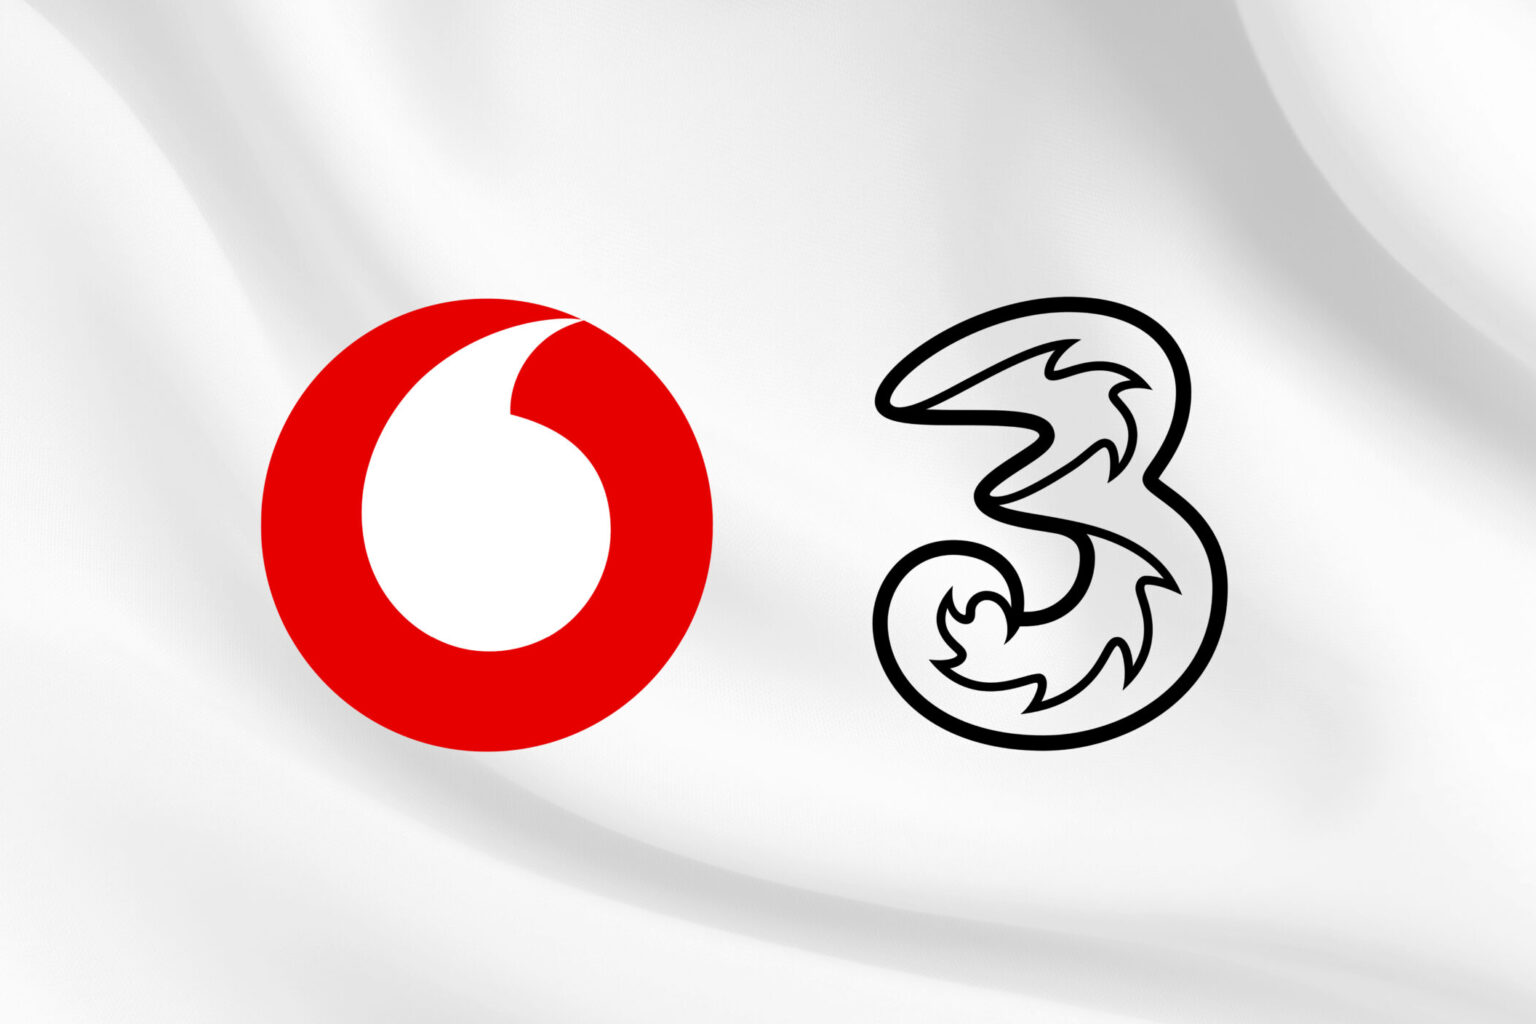 vodafone and three announce merger